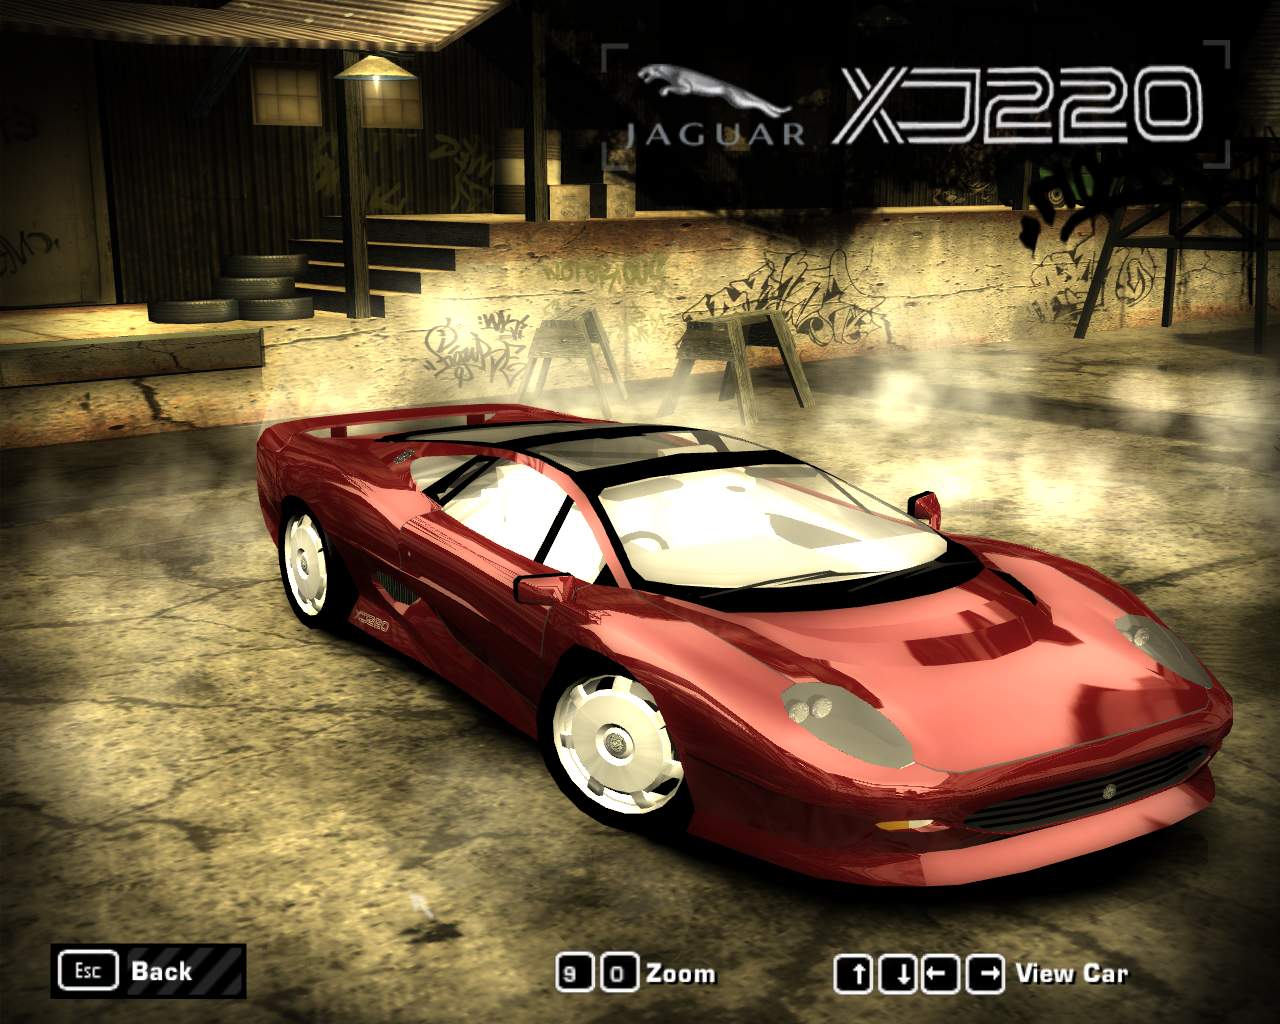 Need For Speed Most Wanted Jaguar XJ220